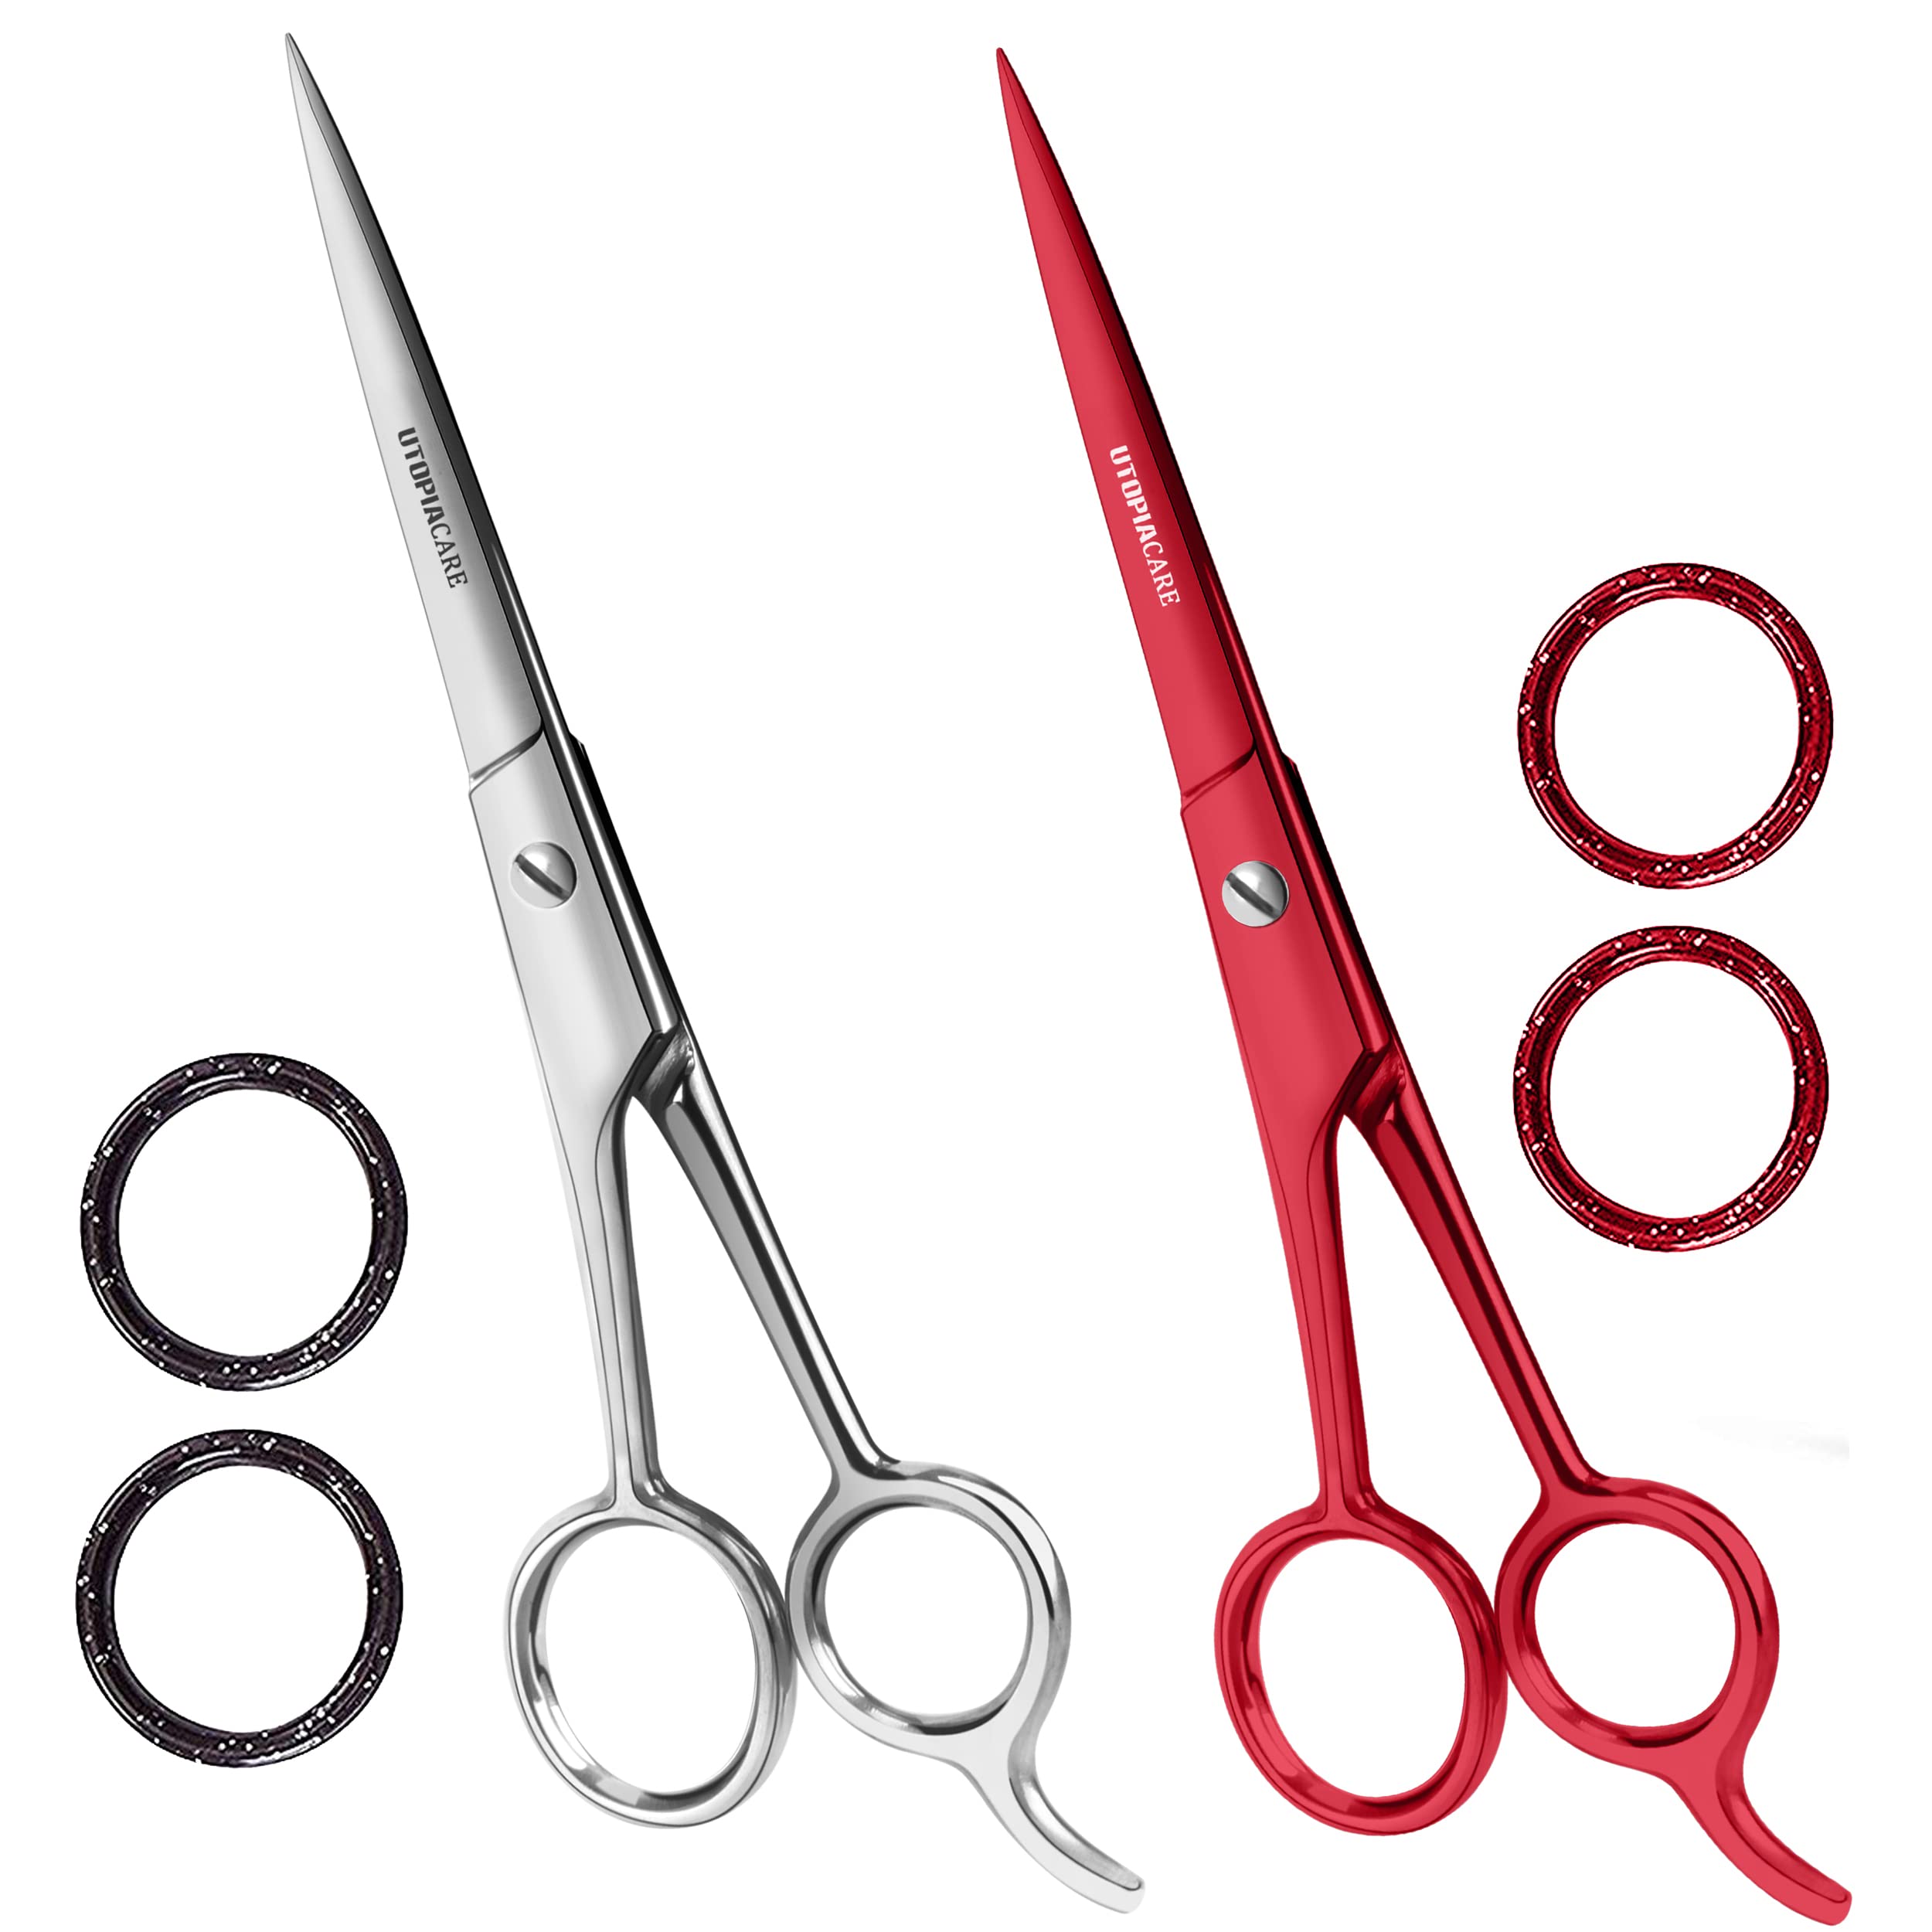 Utopia Care Hairdressing Scissors 6.5 Inches (Set of 2) - Premium Stainless Steel Razor with Sharp Edge Blade – Hair cutting and Salon scissors for Adults, Kids, Barber, Pets (Red and Silver)